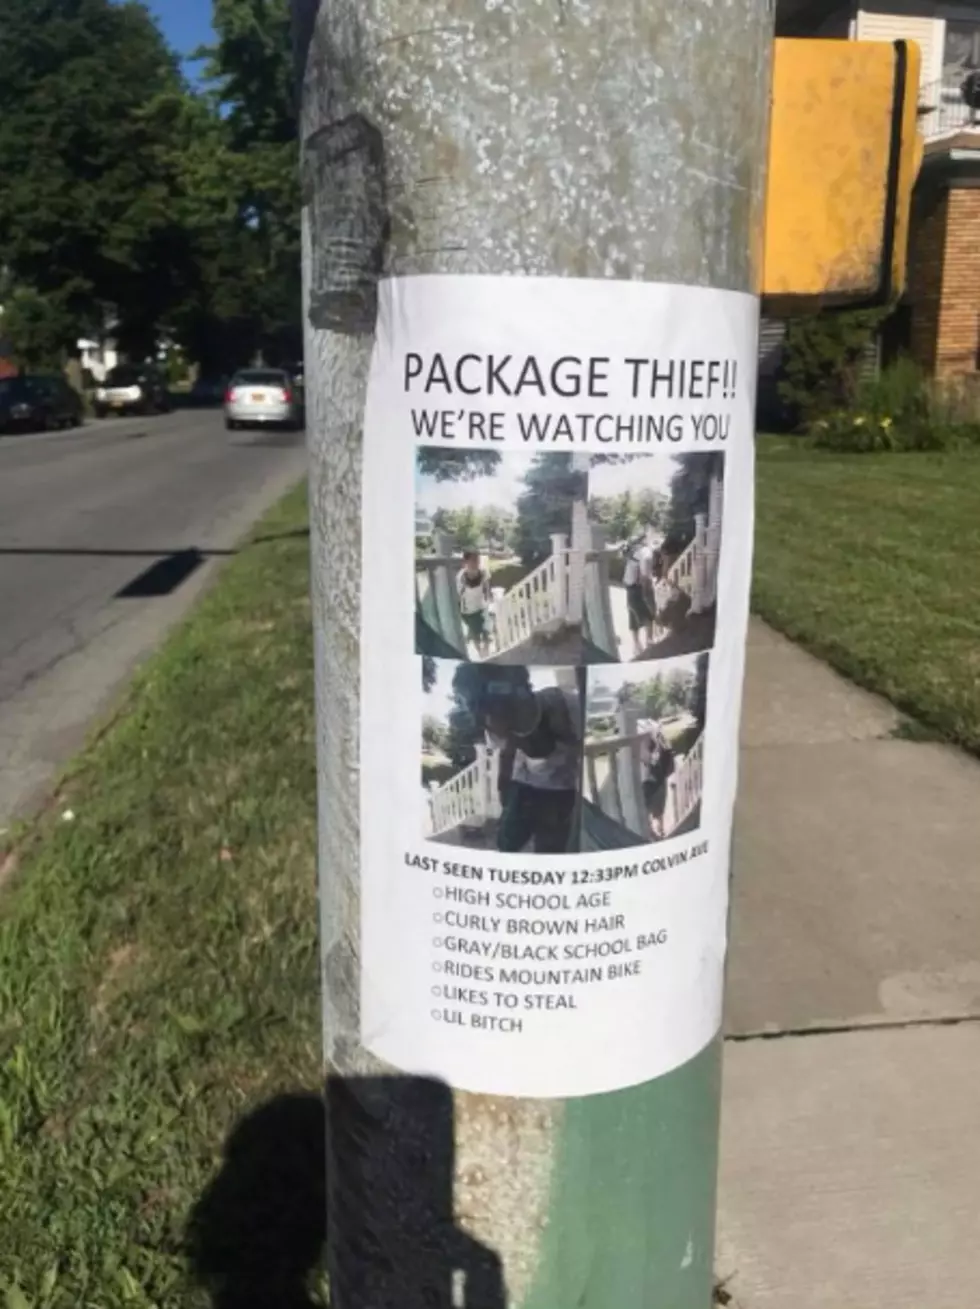 This Guy Got Caught Stealing in North Buffalo&#8211;Look What The Neighborhood Did